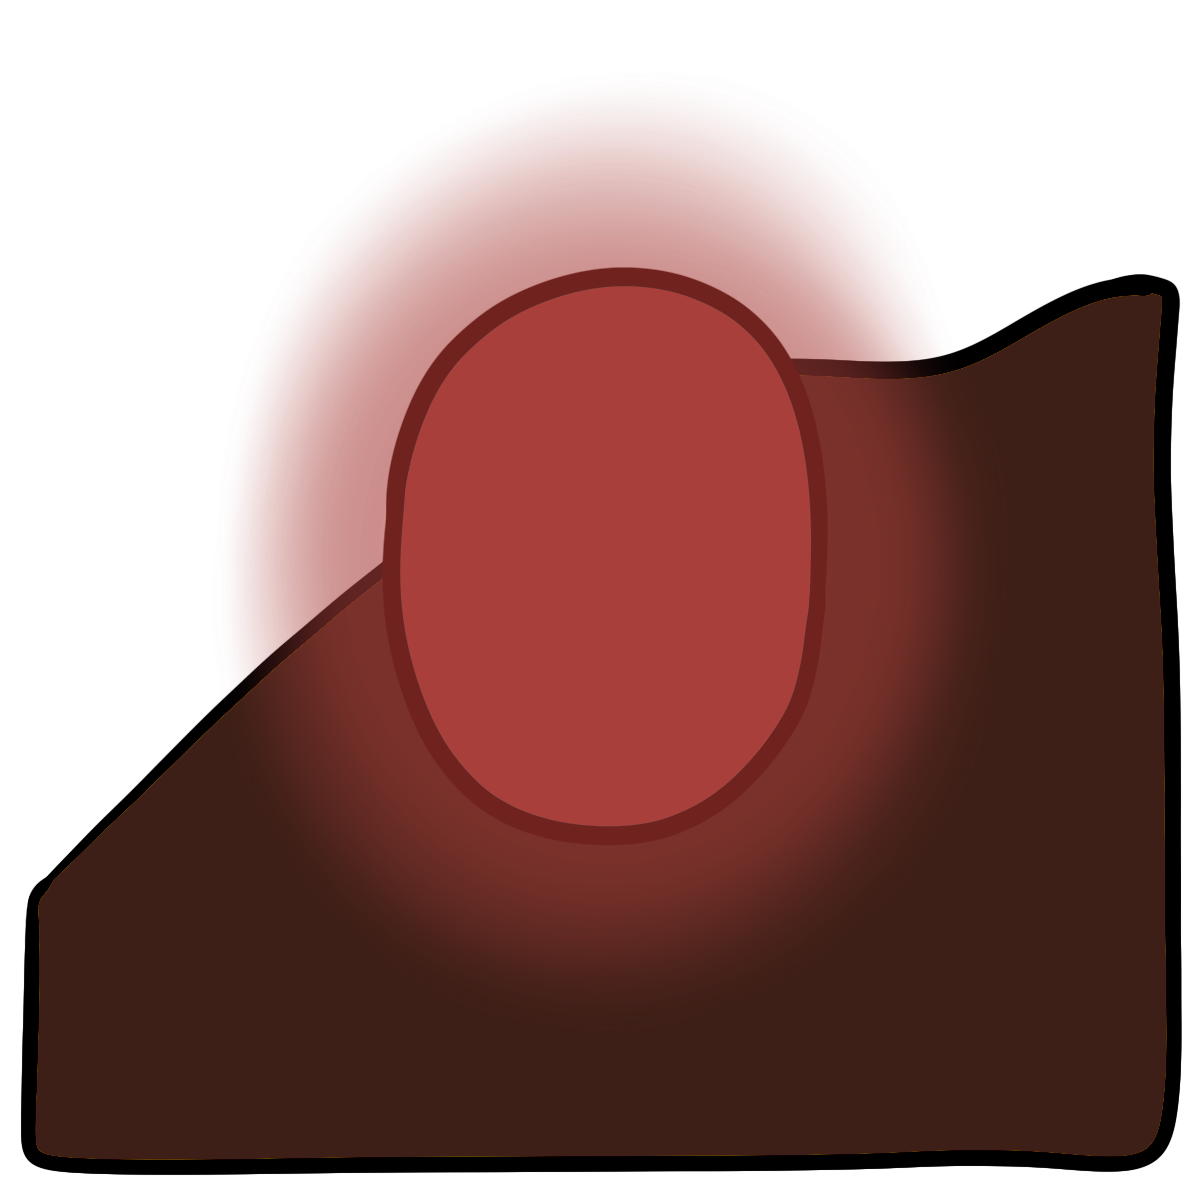 A glowing red oval. Curved dark brown skin fills the bottom half of the background.